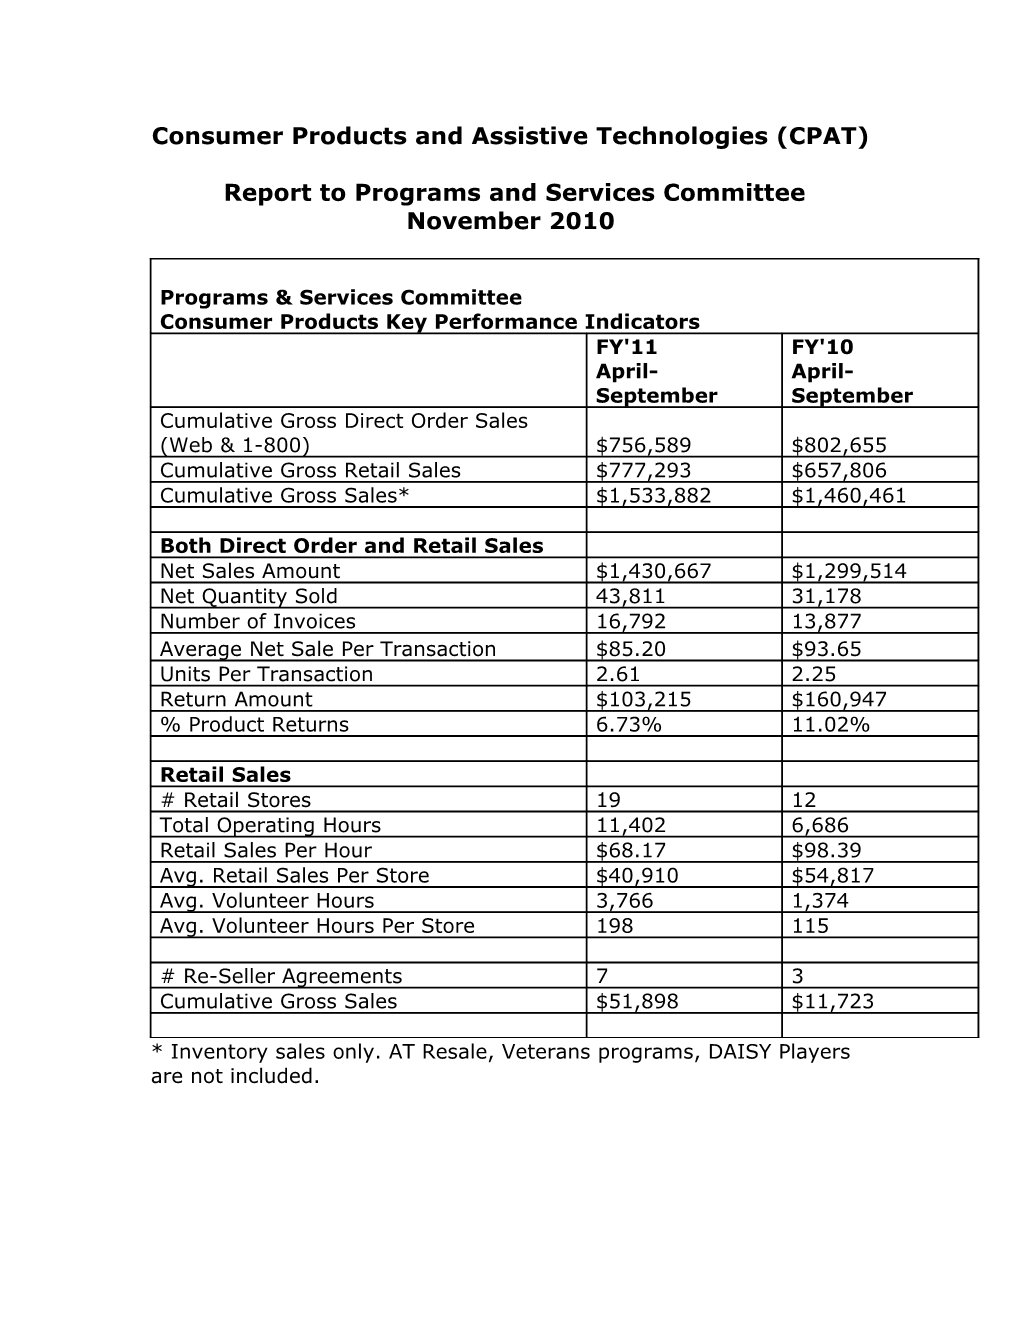 Programs & Services Committee